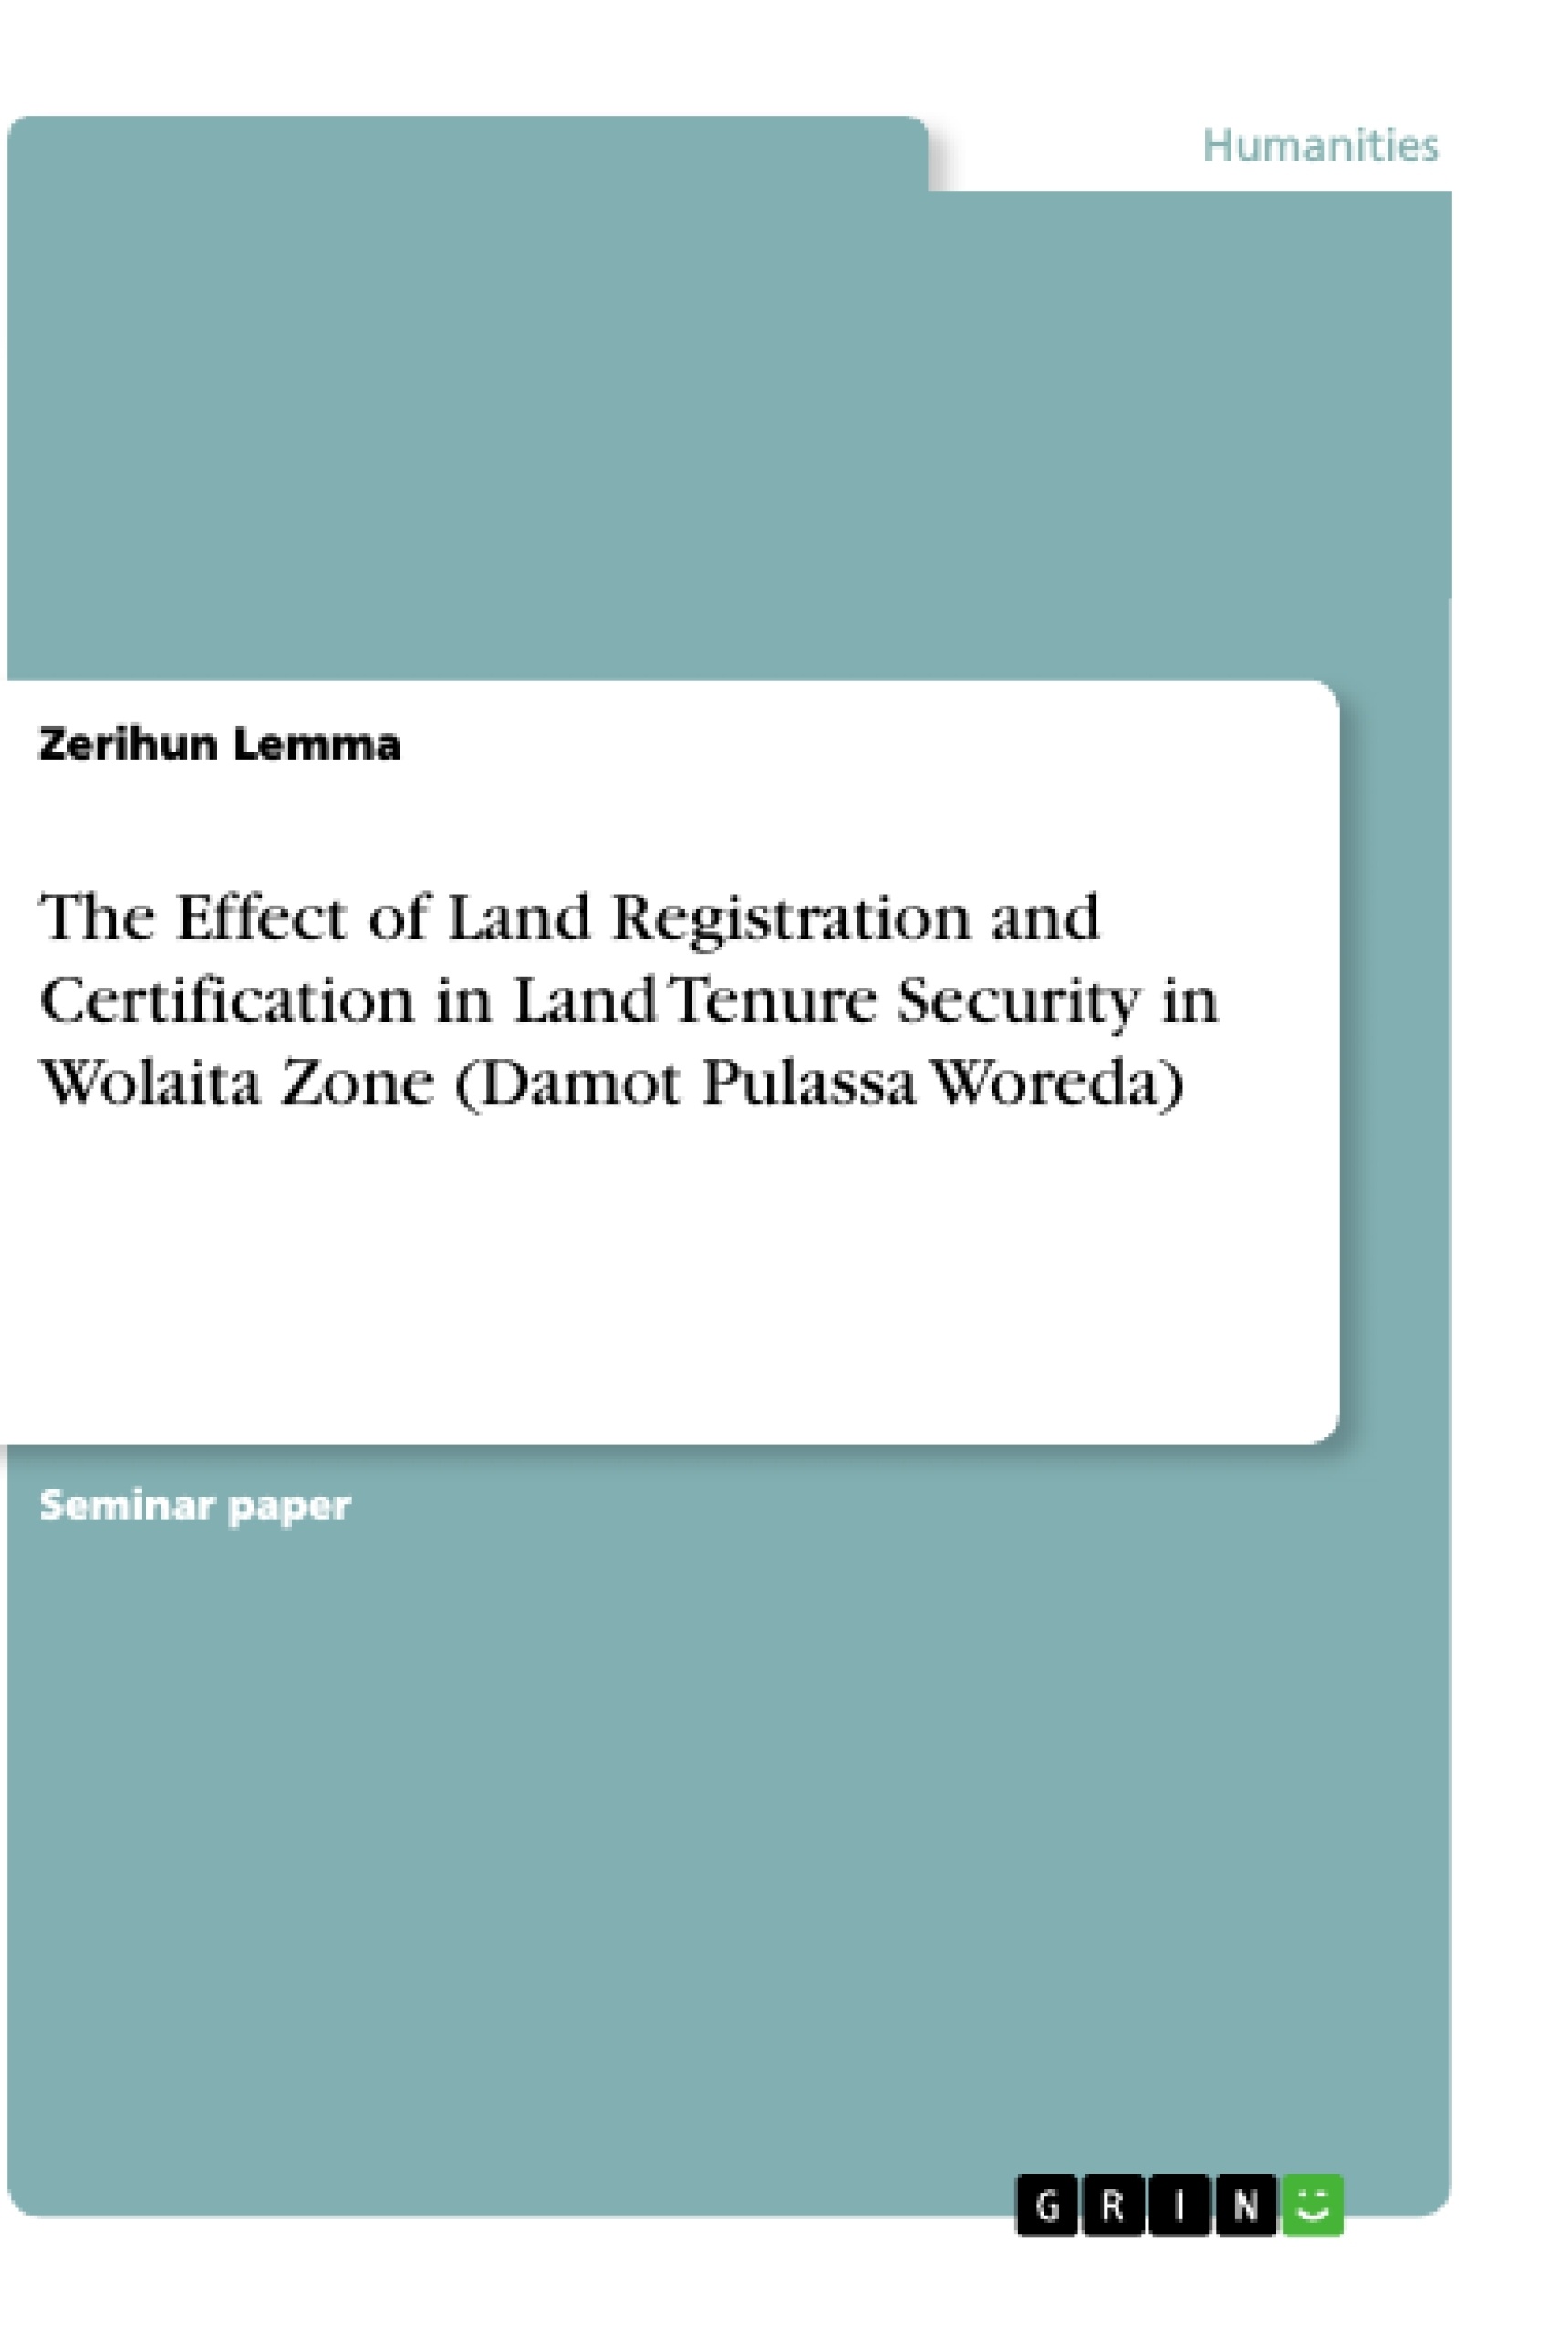 Title: The Effect of Land Registration and Certification in Land Tenure Security in Wolaita Zone (Damot Pulassa Woreda)